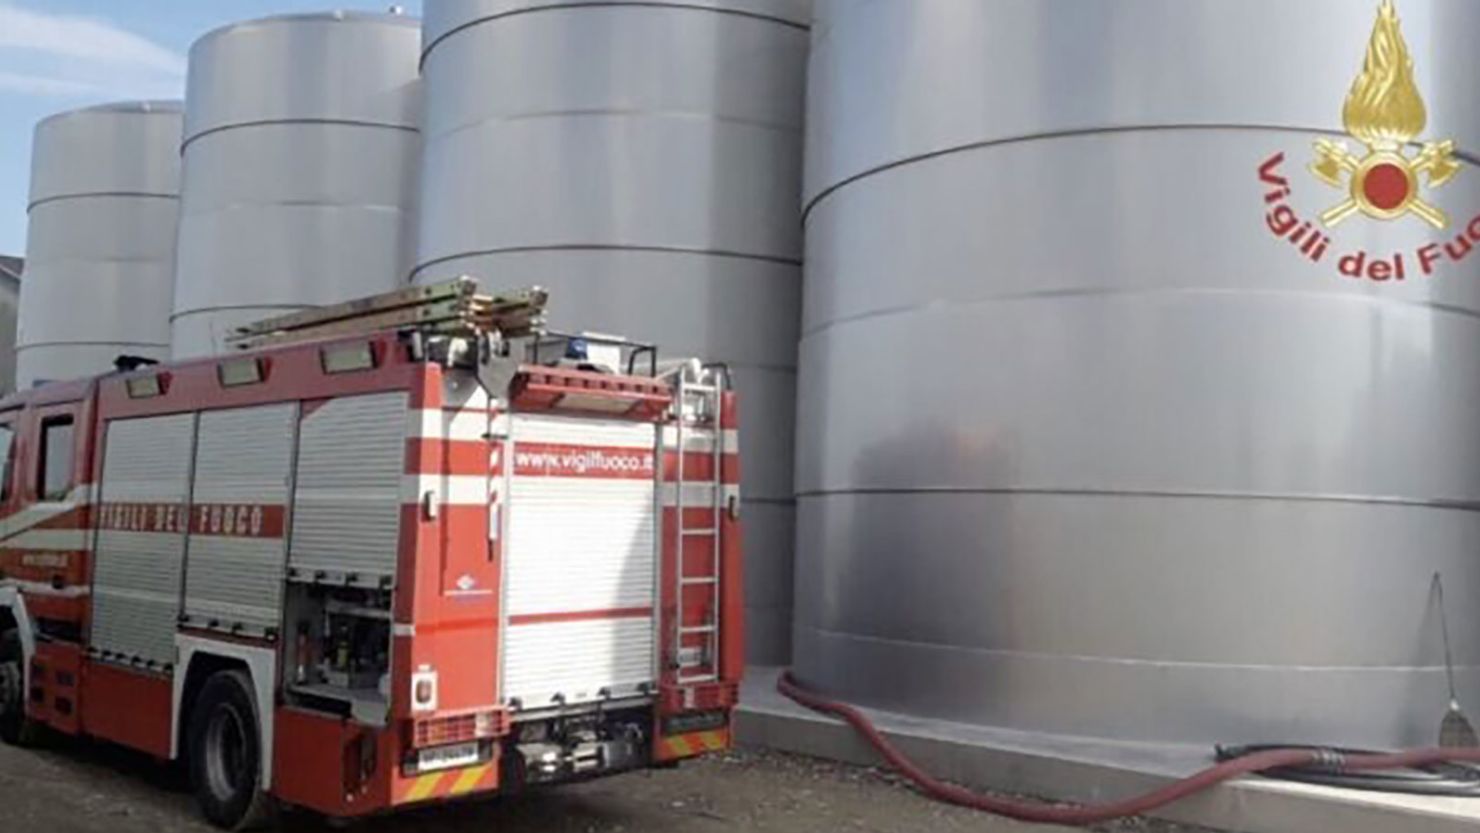 The incident occurred at the Ca'di Rajo winery in Treviso, northern Italy. 